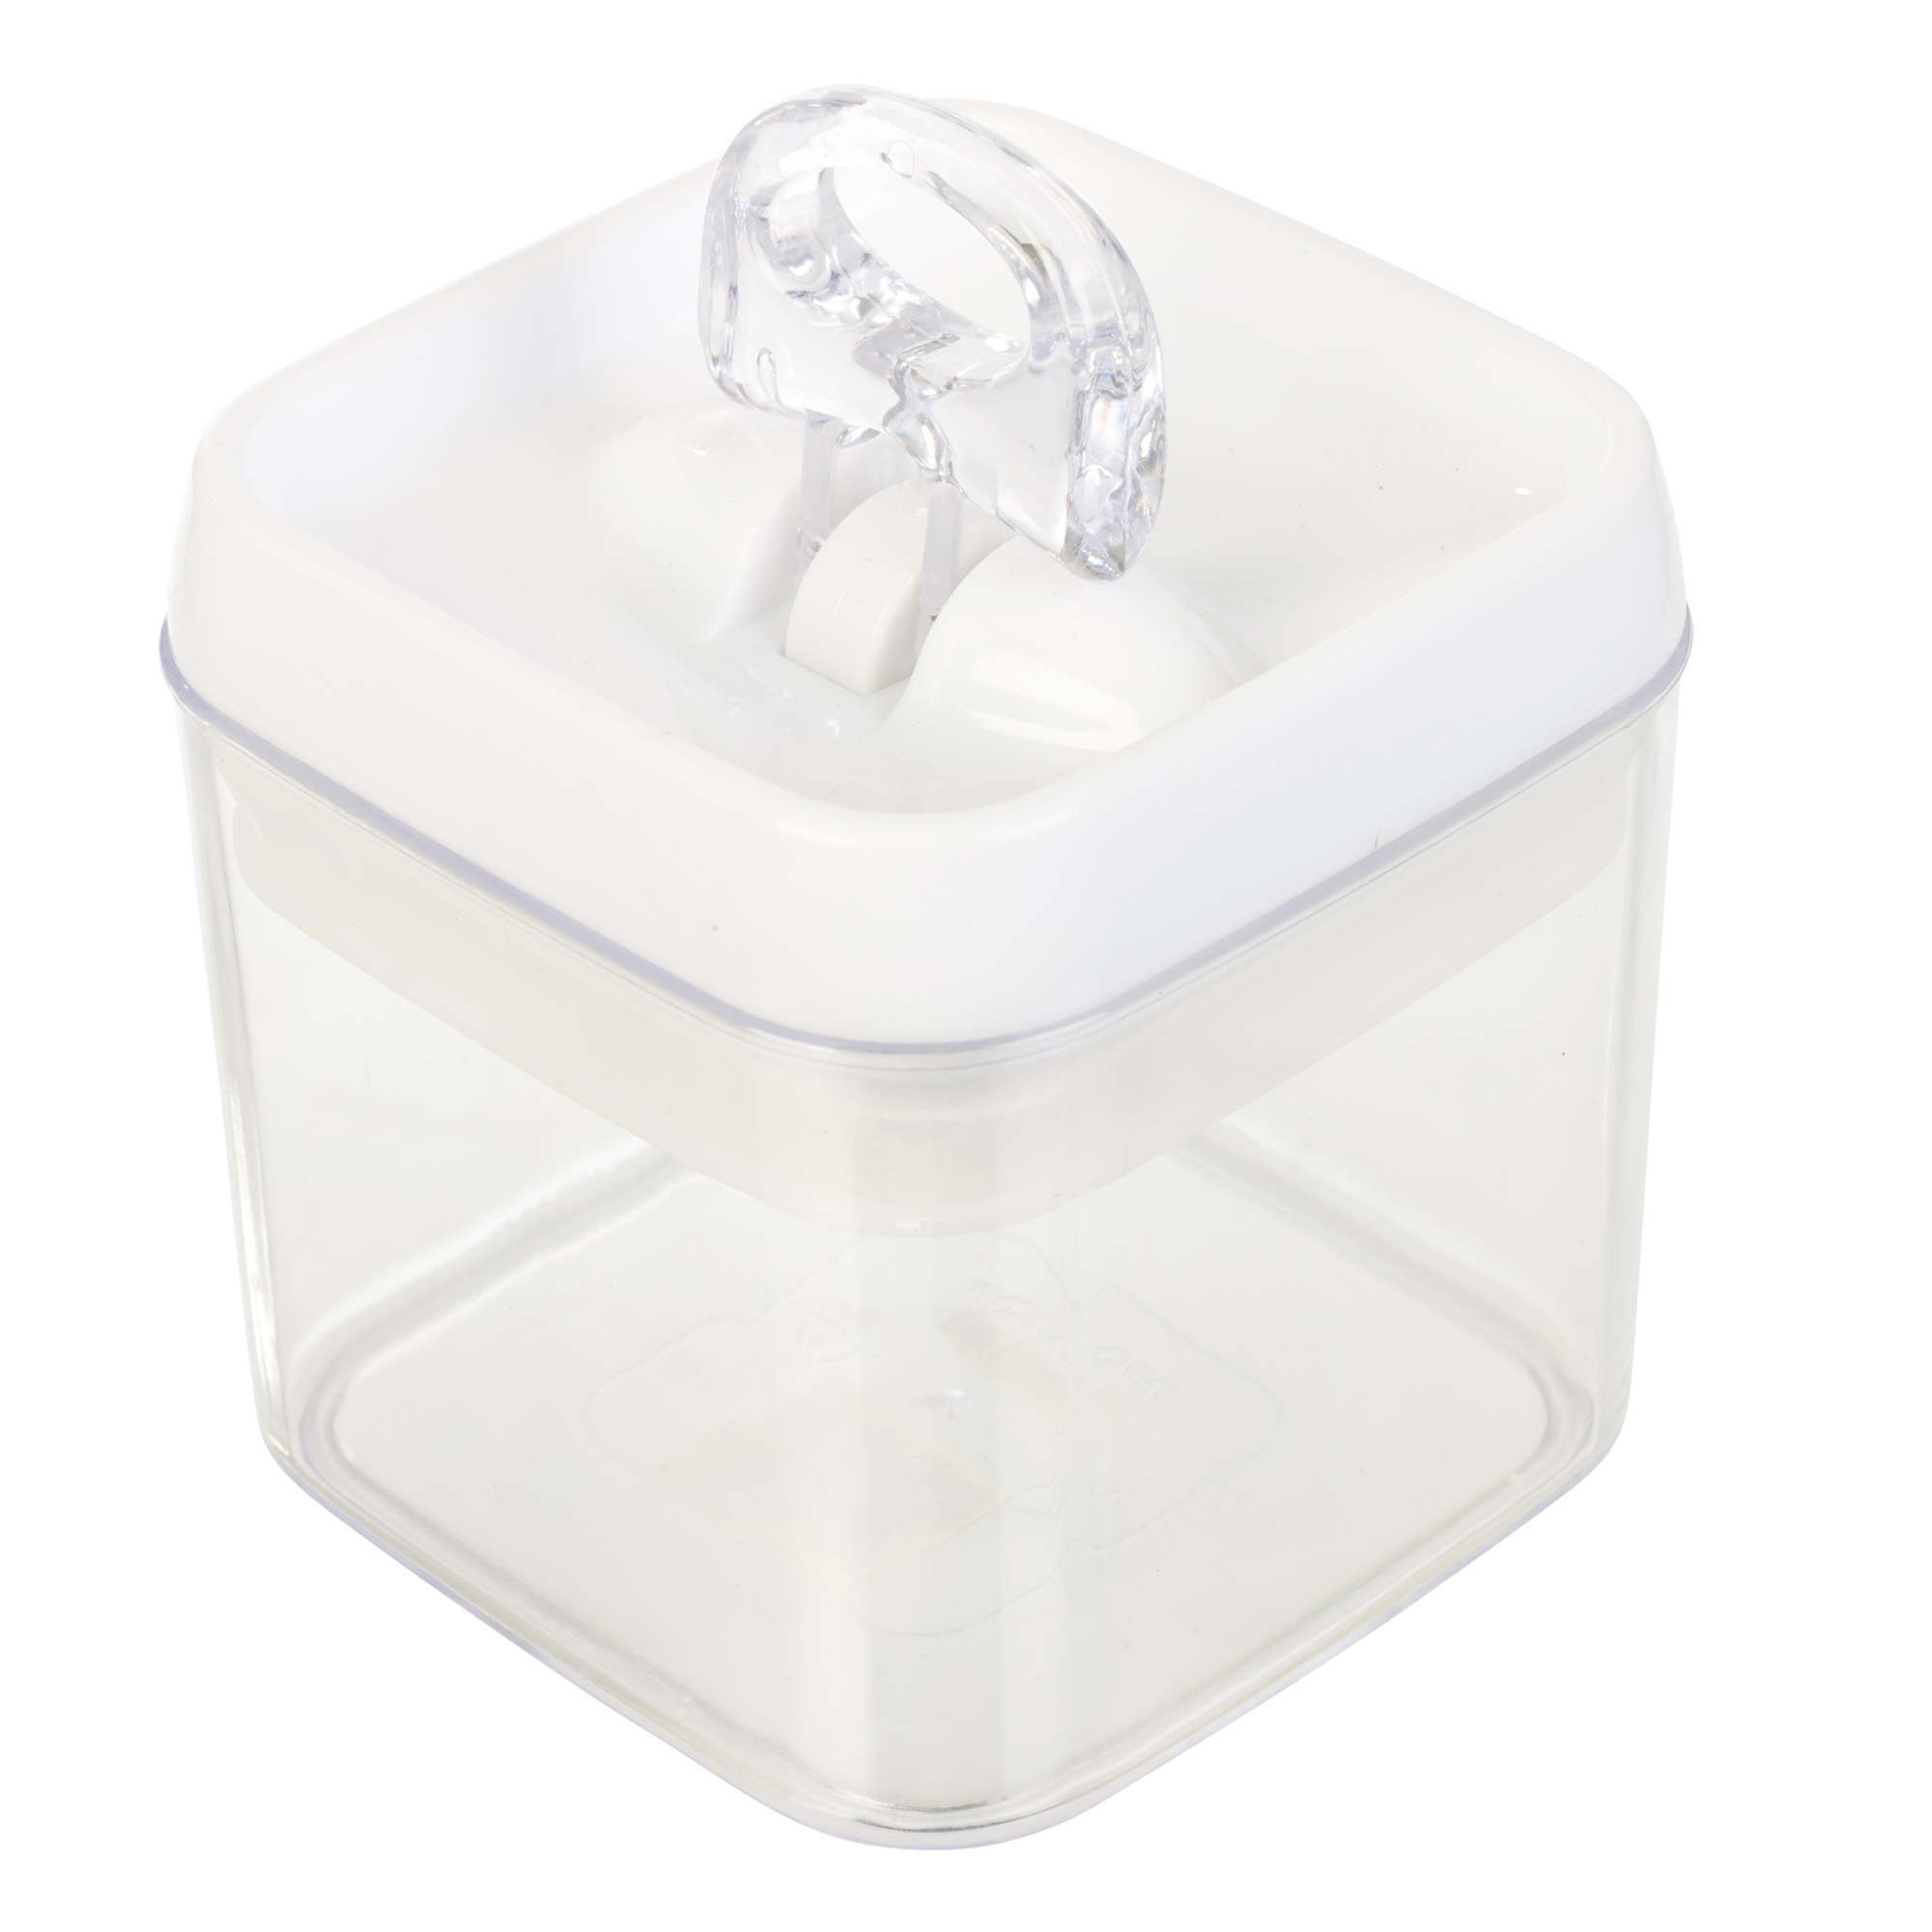 Creatice Kitchen Storage Containers Wilko with Simple Decor